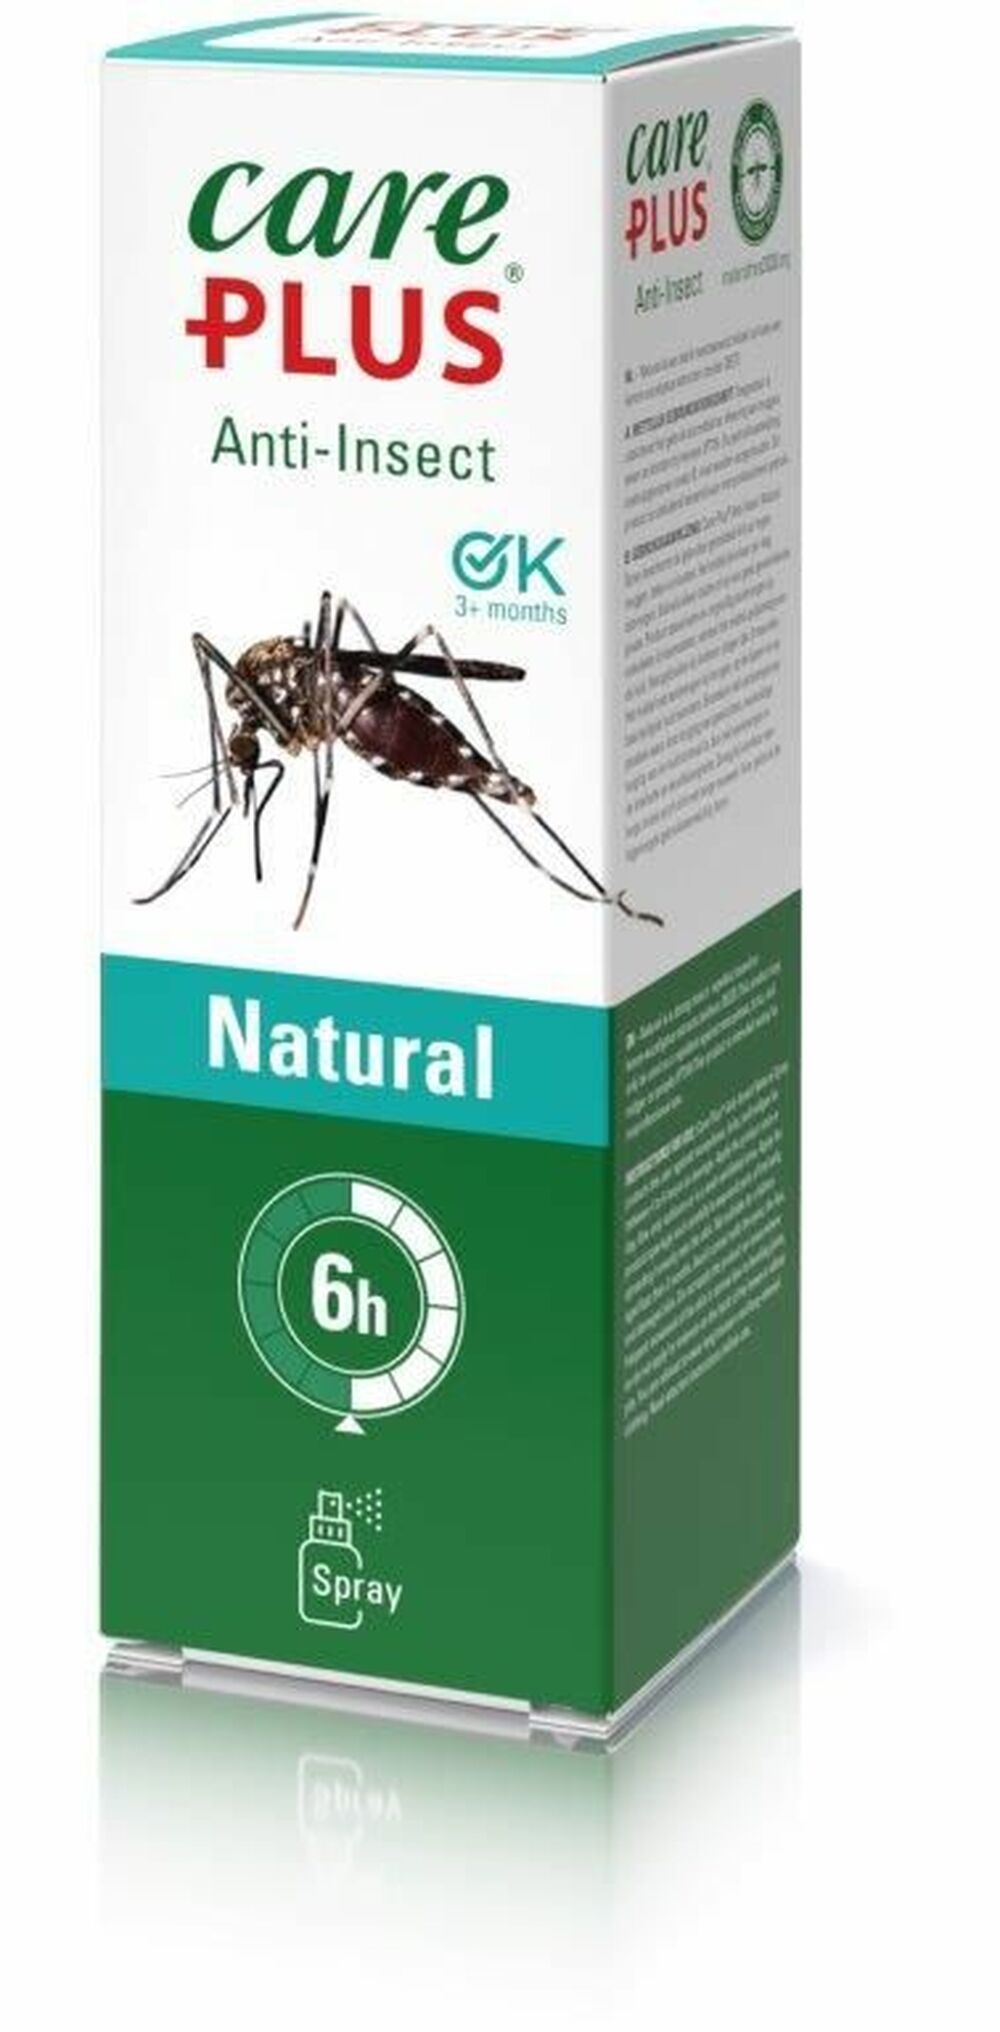 Care Plus Anti-Insect Natural